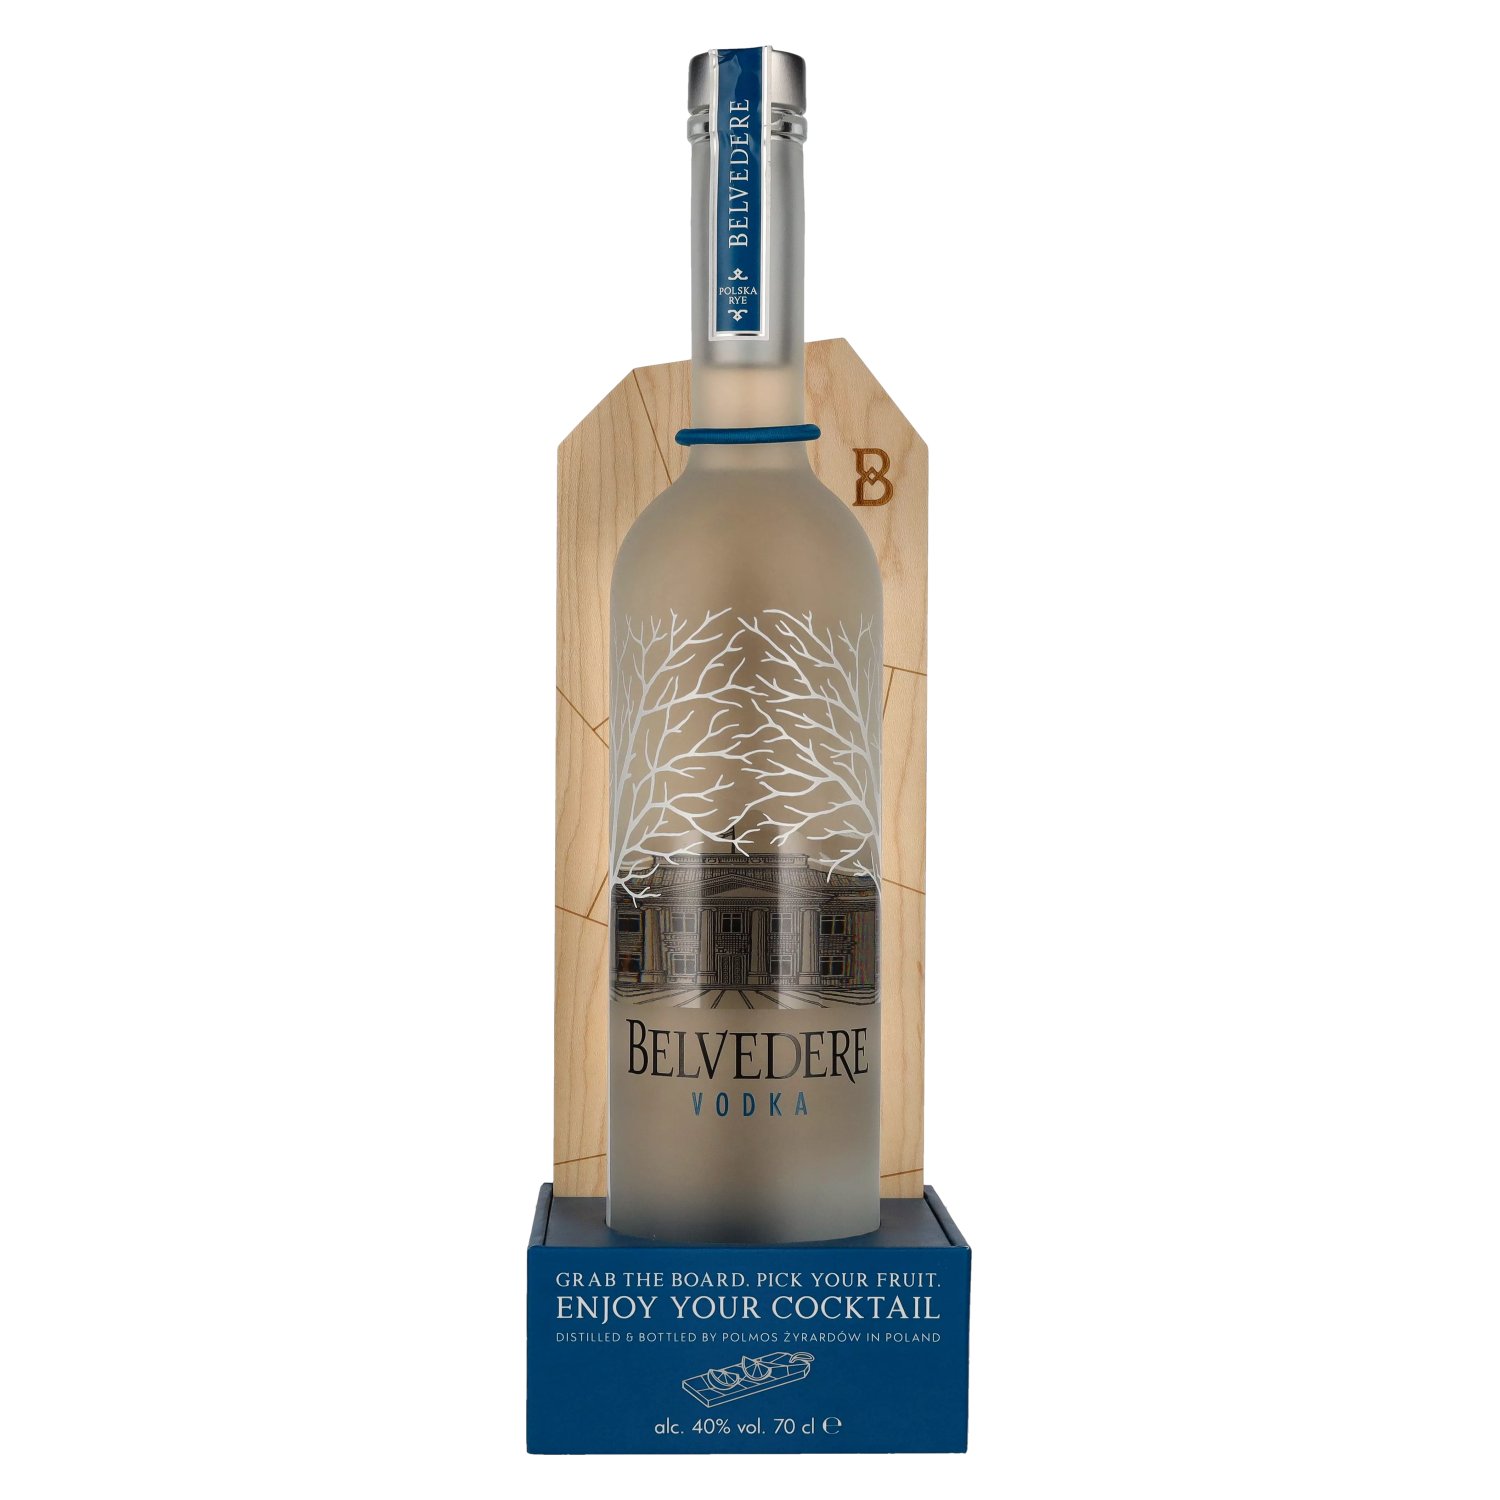 Holzbrett 40% Vodka Belvedere with Vol. 0,7l